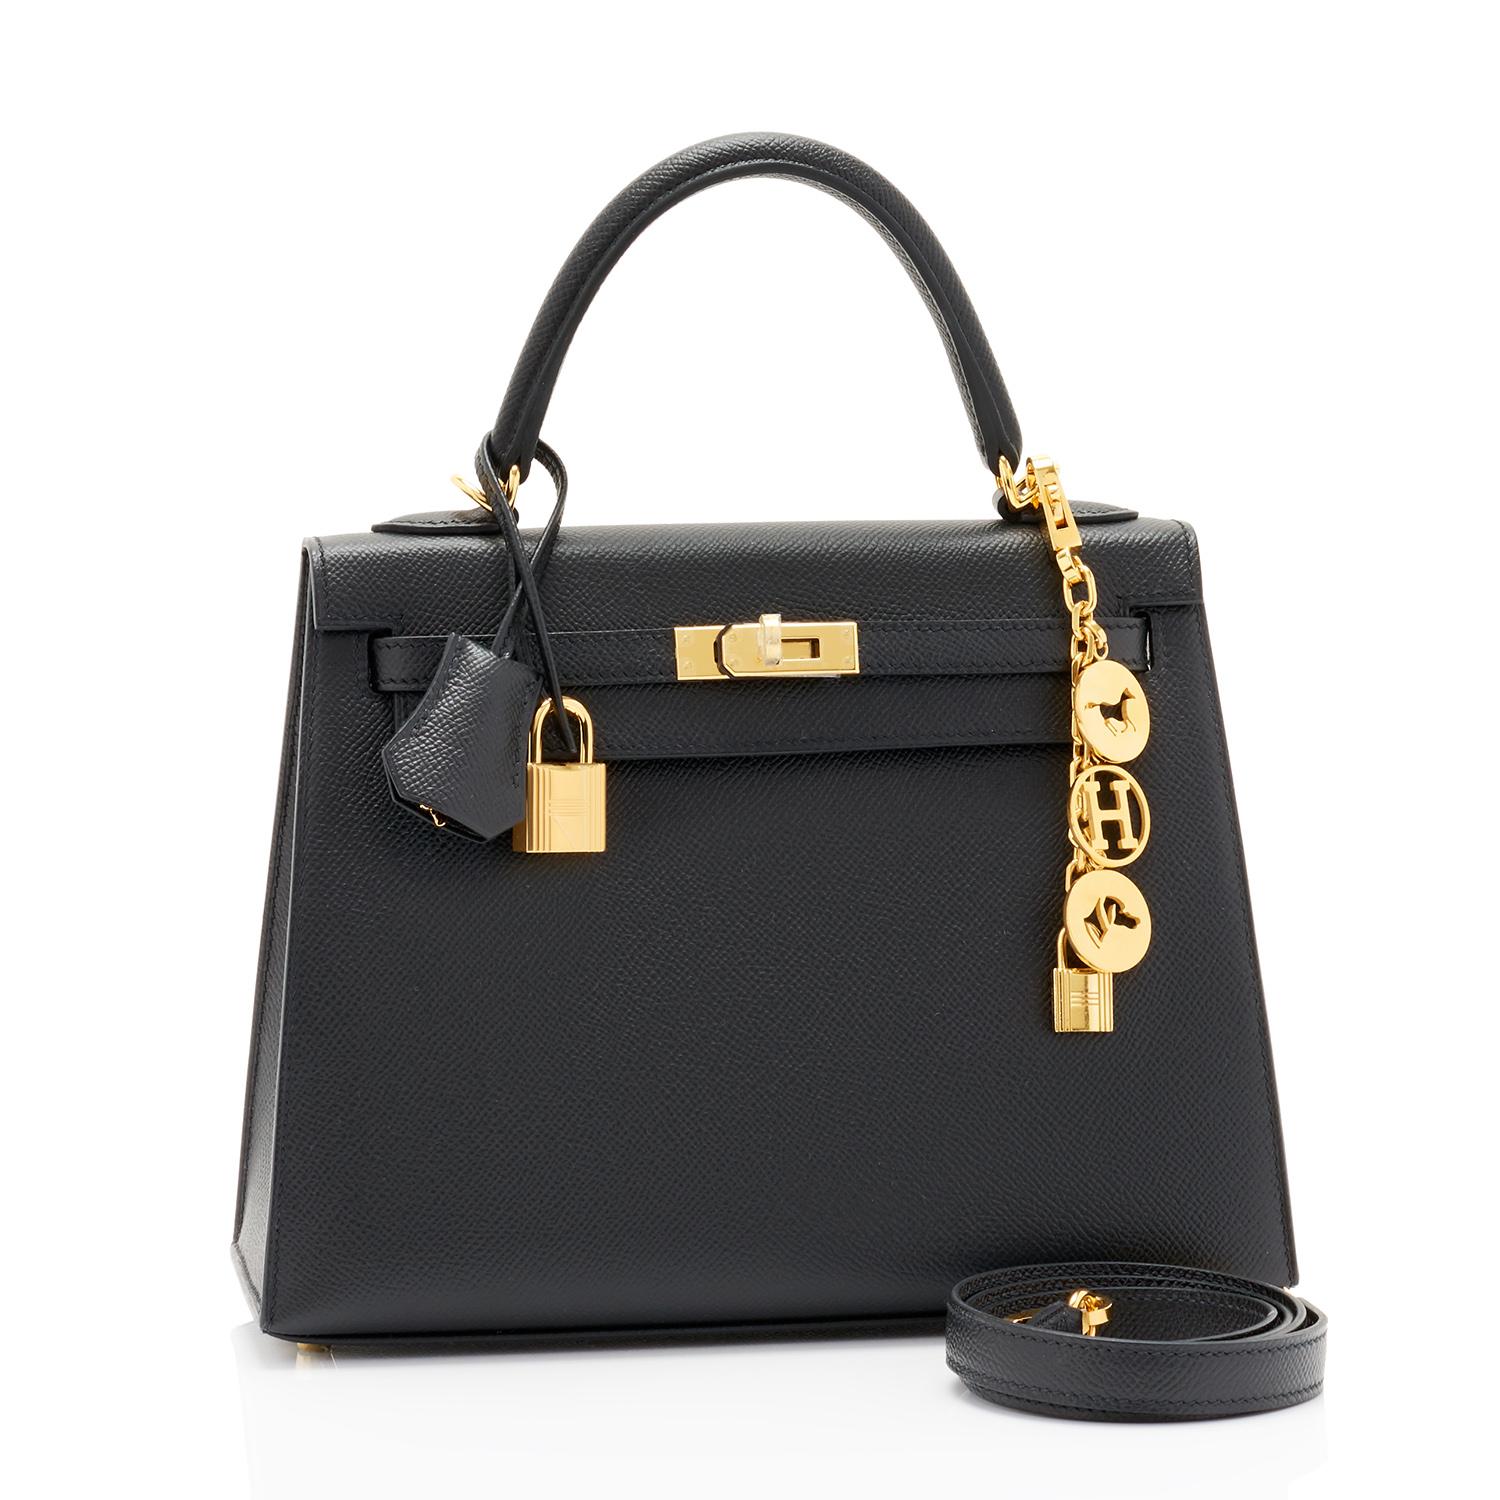 *This is the discounted BANK WIRE price. Any other payment method will result in the order being cancelled.*

Hermes Kelly 25cm Jet Black Epsom Sellier Gold Jewel Brand New Store Fresh
Brand New in Box. Store Fresh. Pristine Condition (with plastic